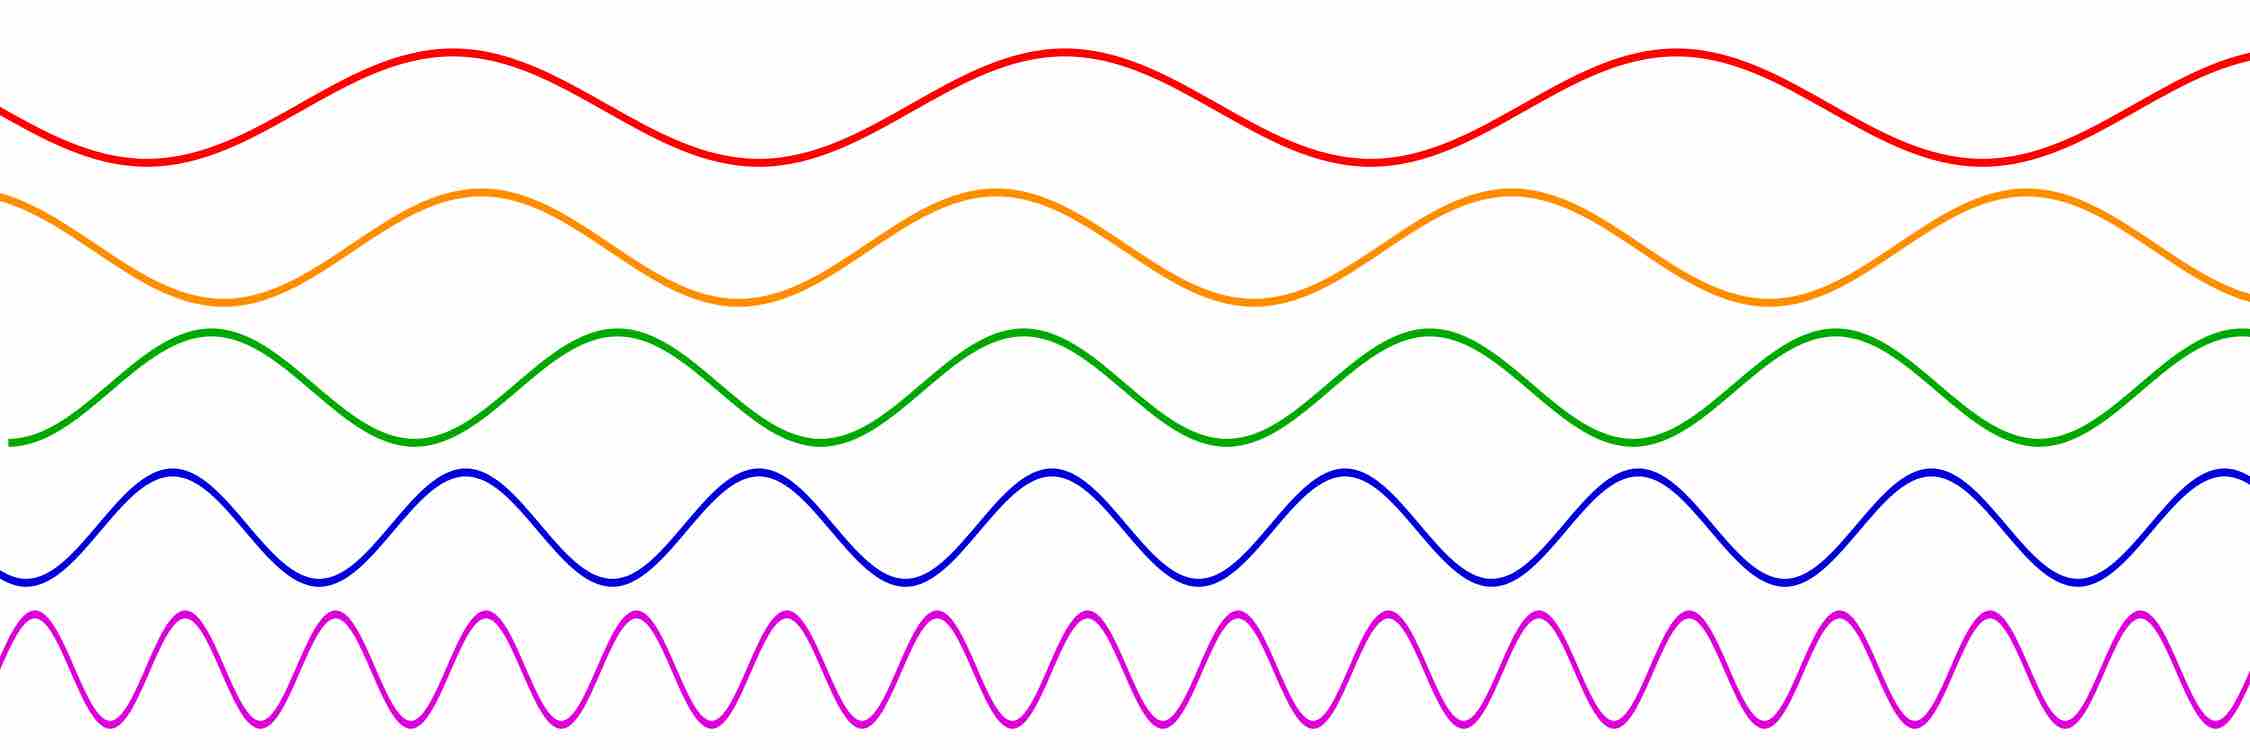 Frequencies of different sine waves.